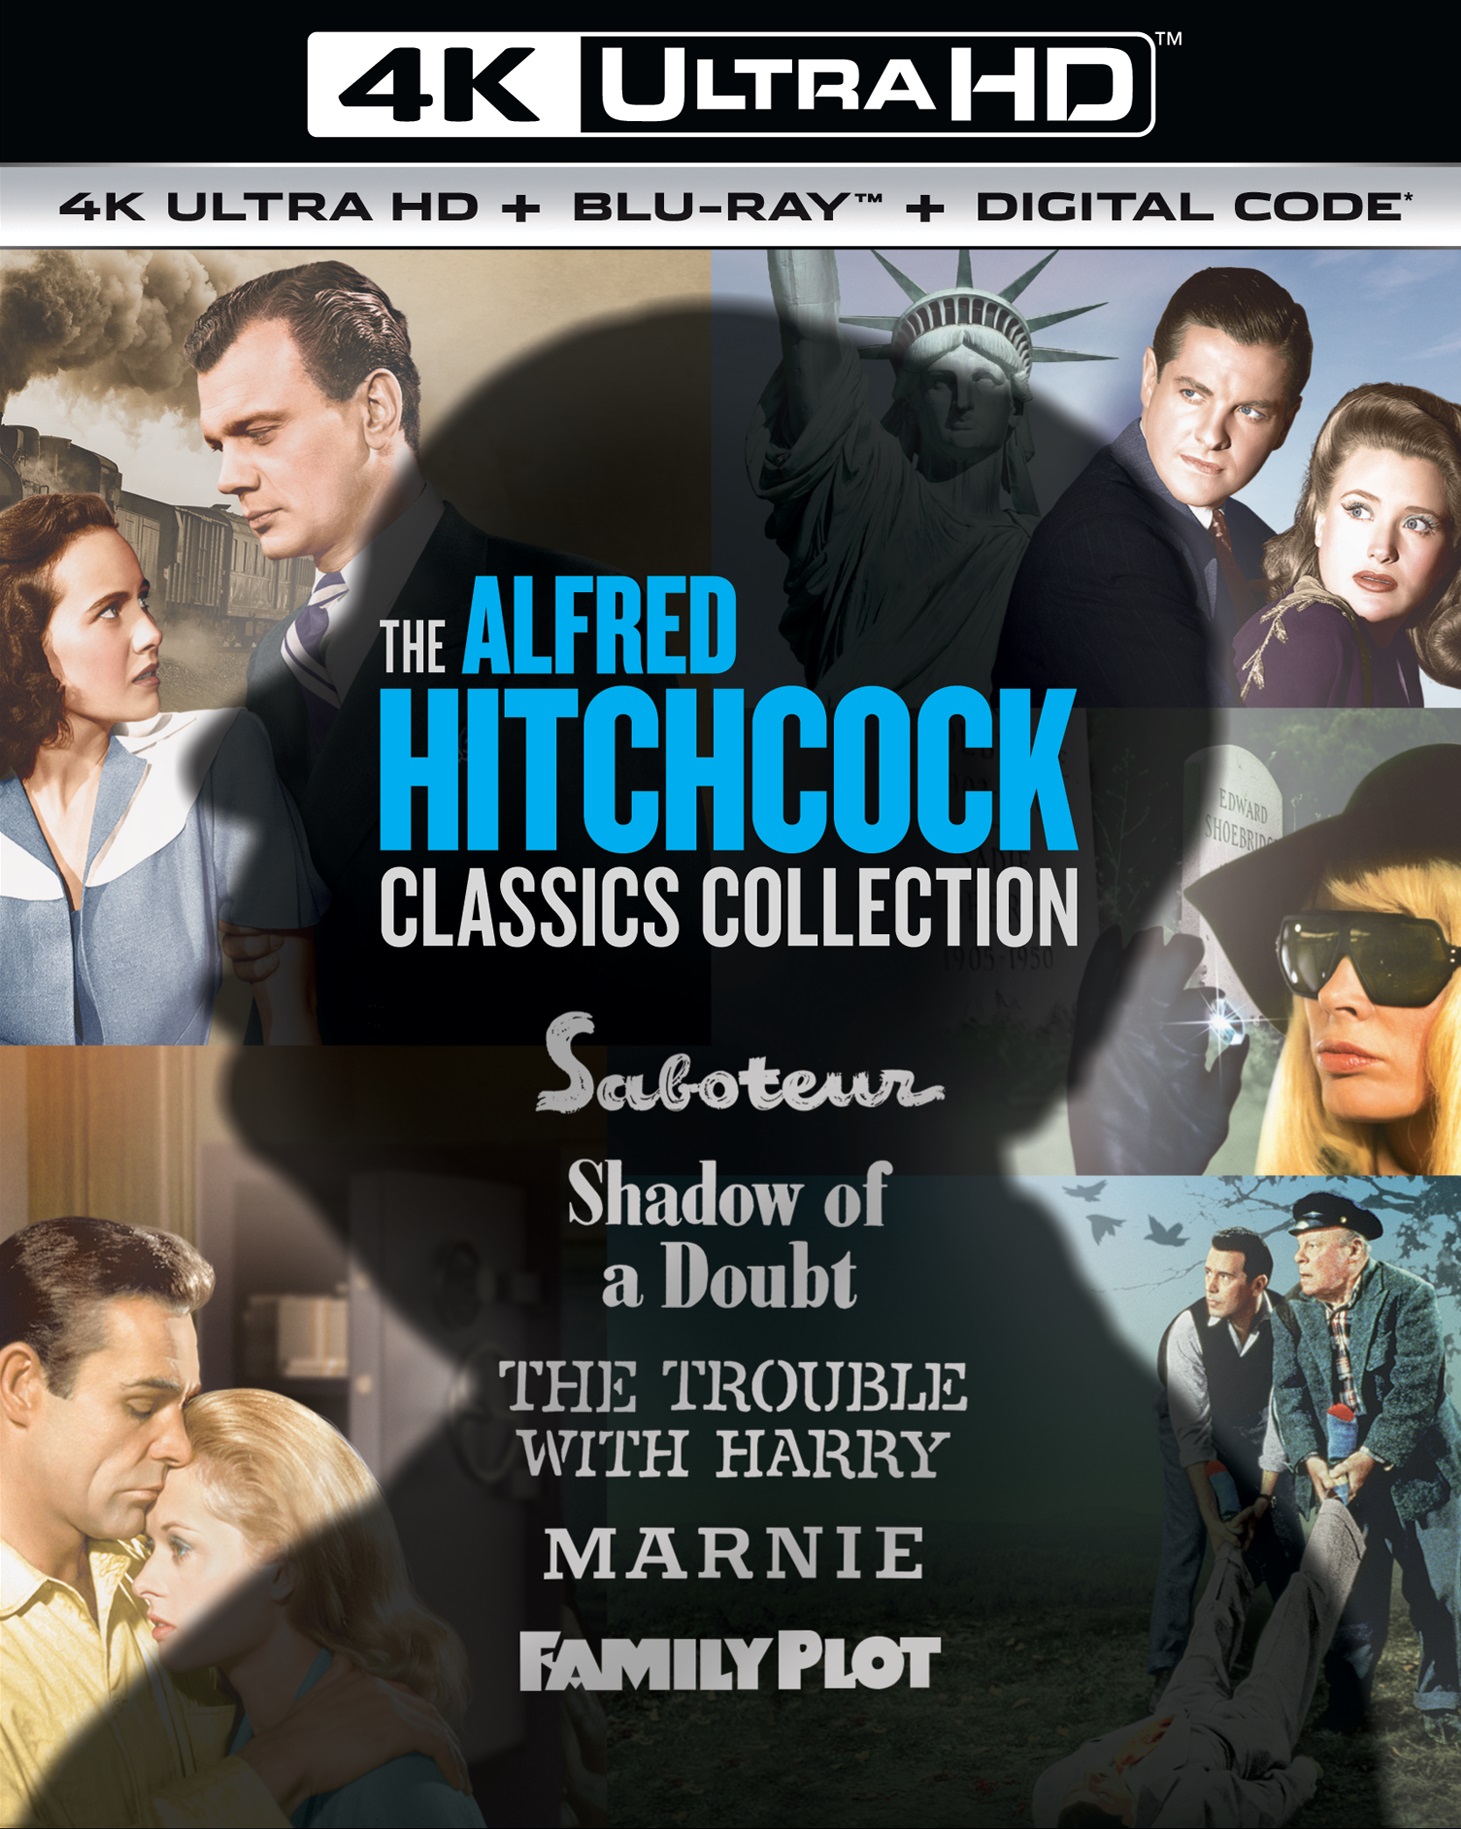 The Alfred Hitchcock Classics Collection (4K Ultra HD + Blu-ray (Boxset)) - UHD [ 1976 ]  - Classic Movies On Blu-ray - Movies On GRUV